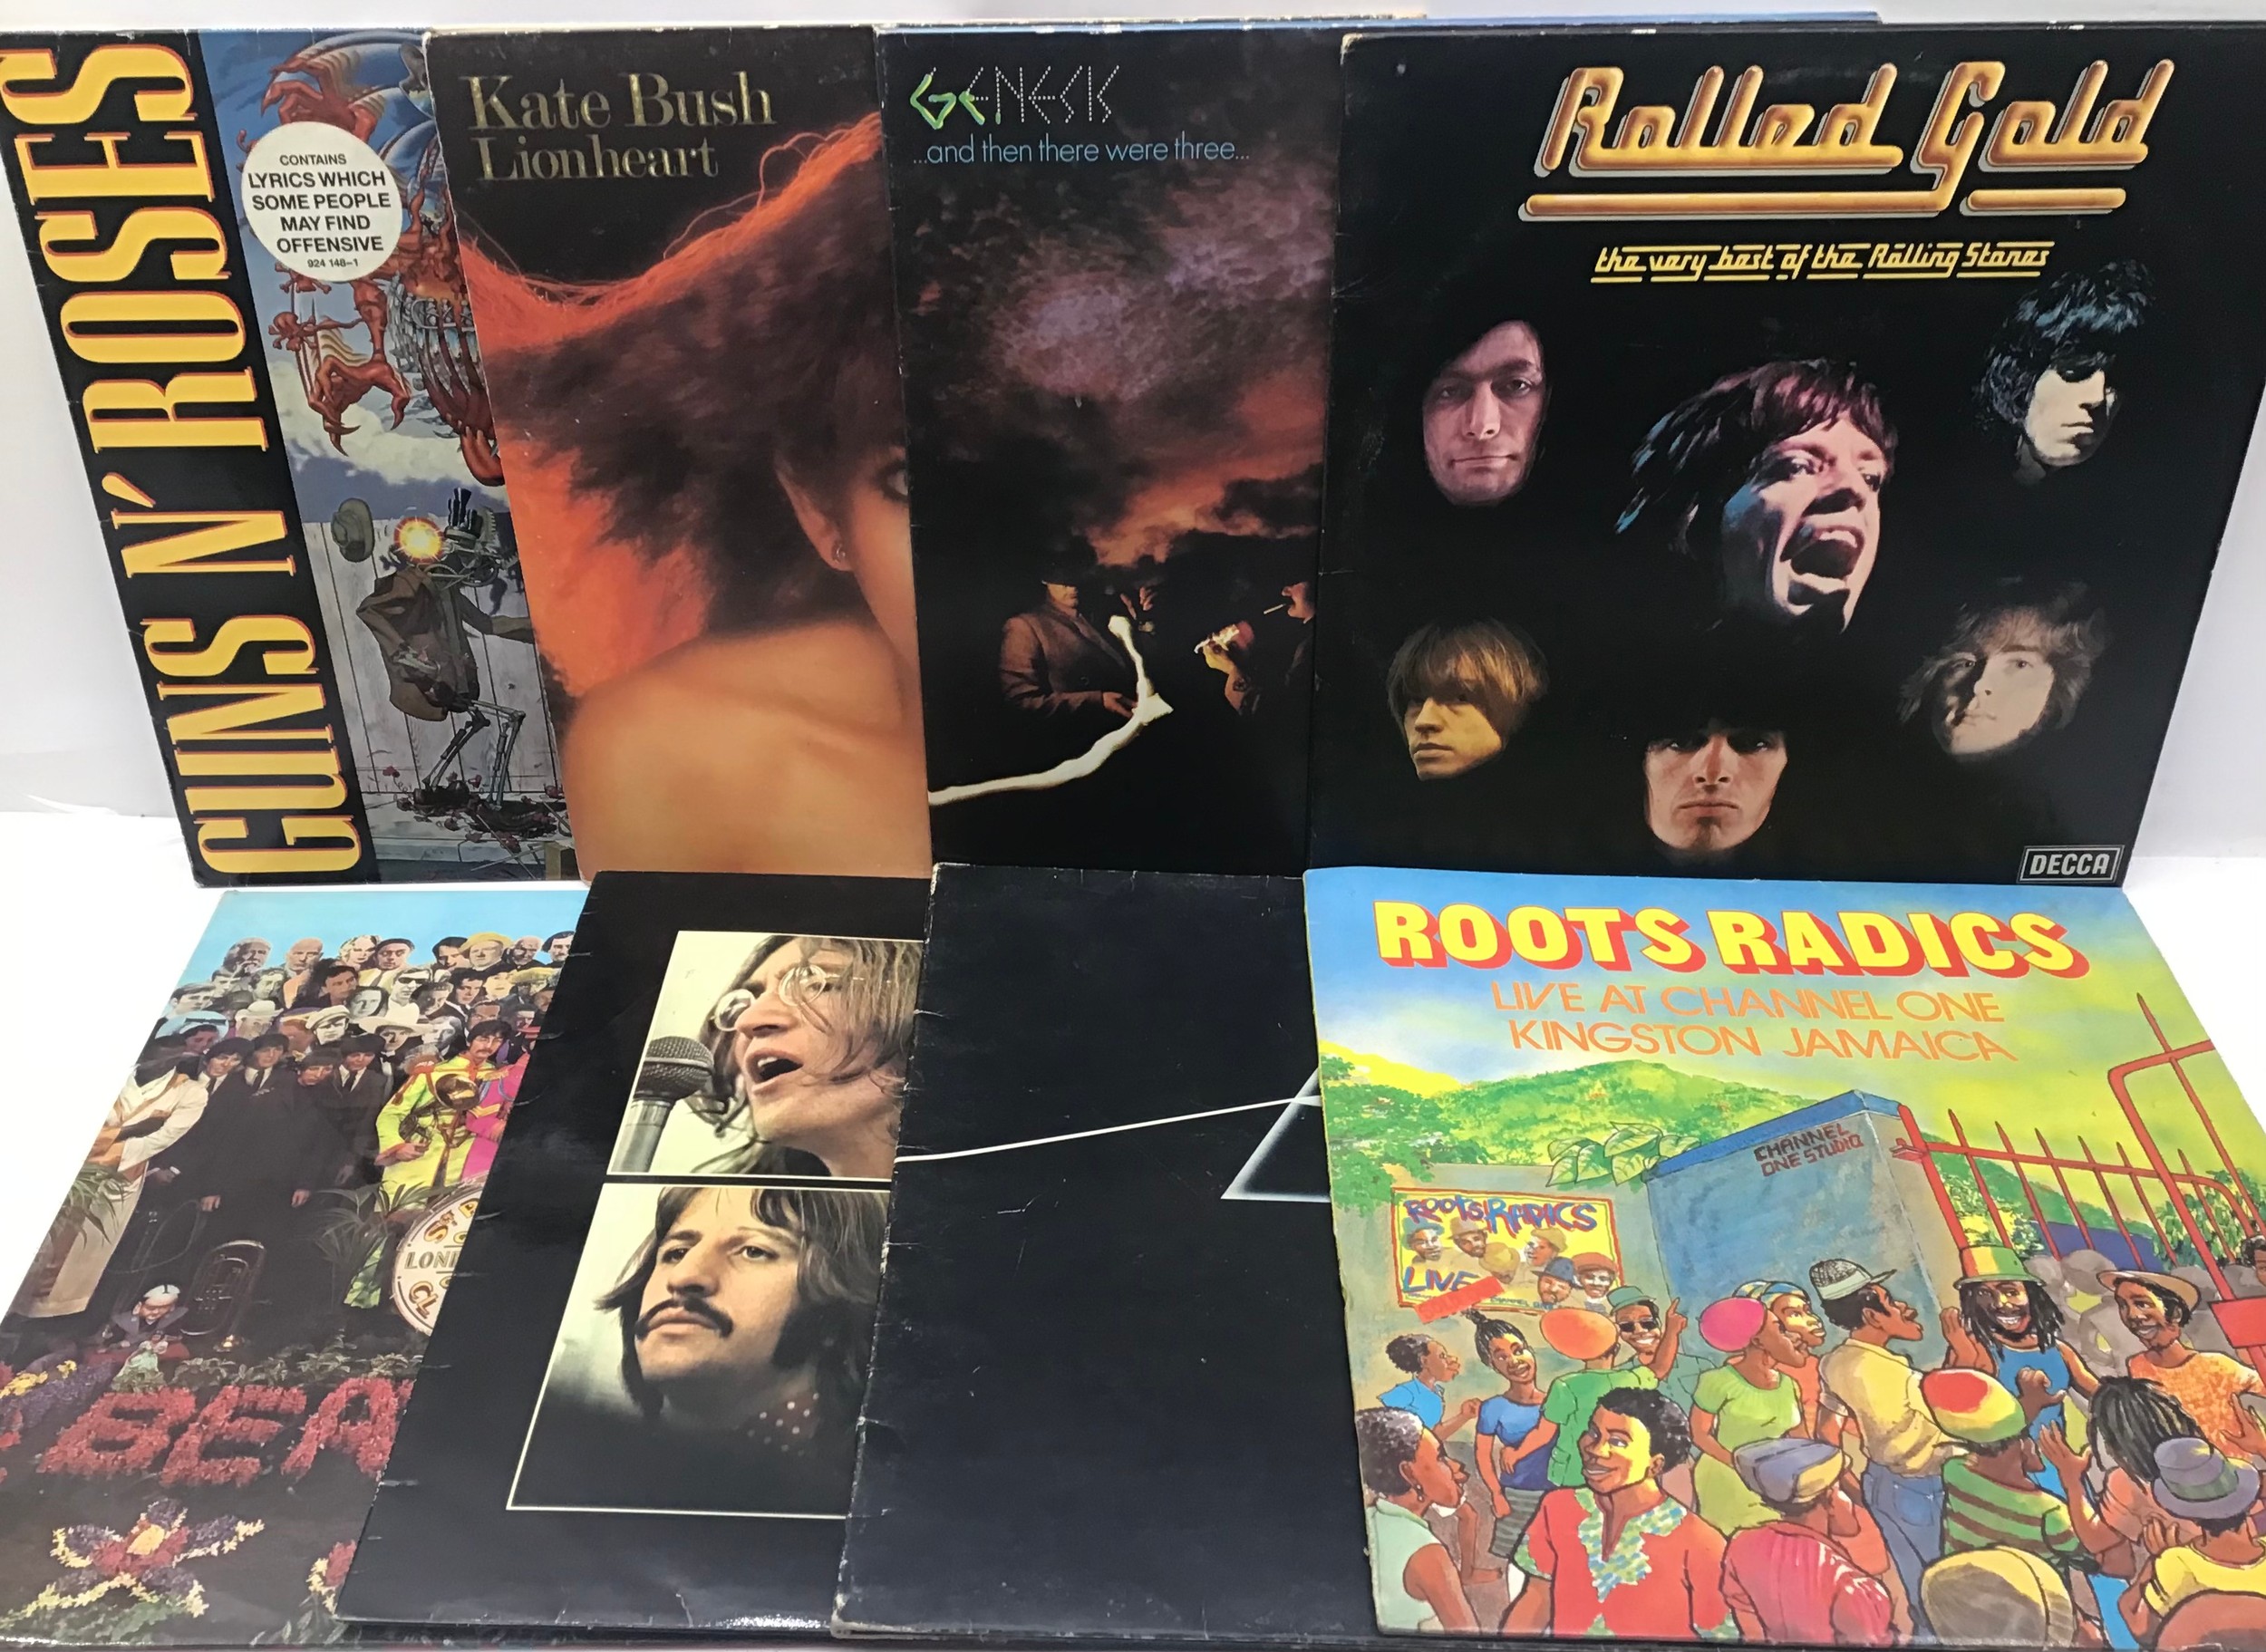 A BOX OF VARIOUS ROCK AND POP LP RECORDS. These records include The Beatles - Madonna - Madness - Image 3 of 3